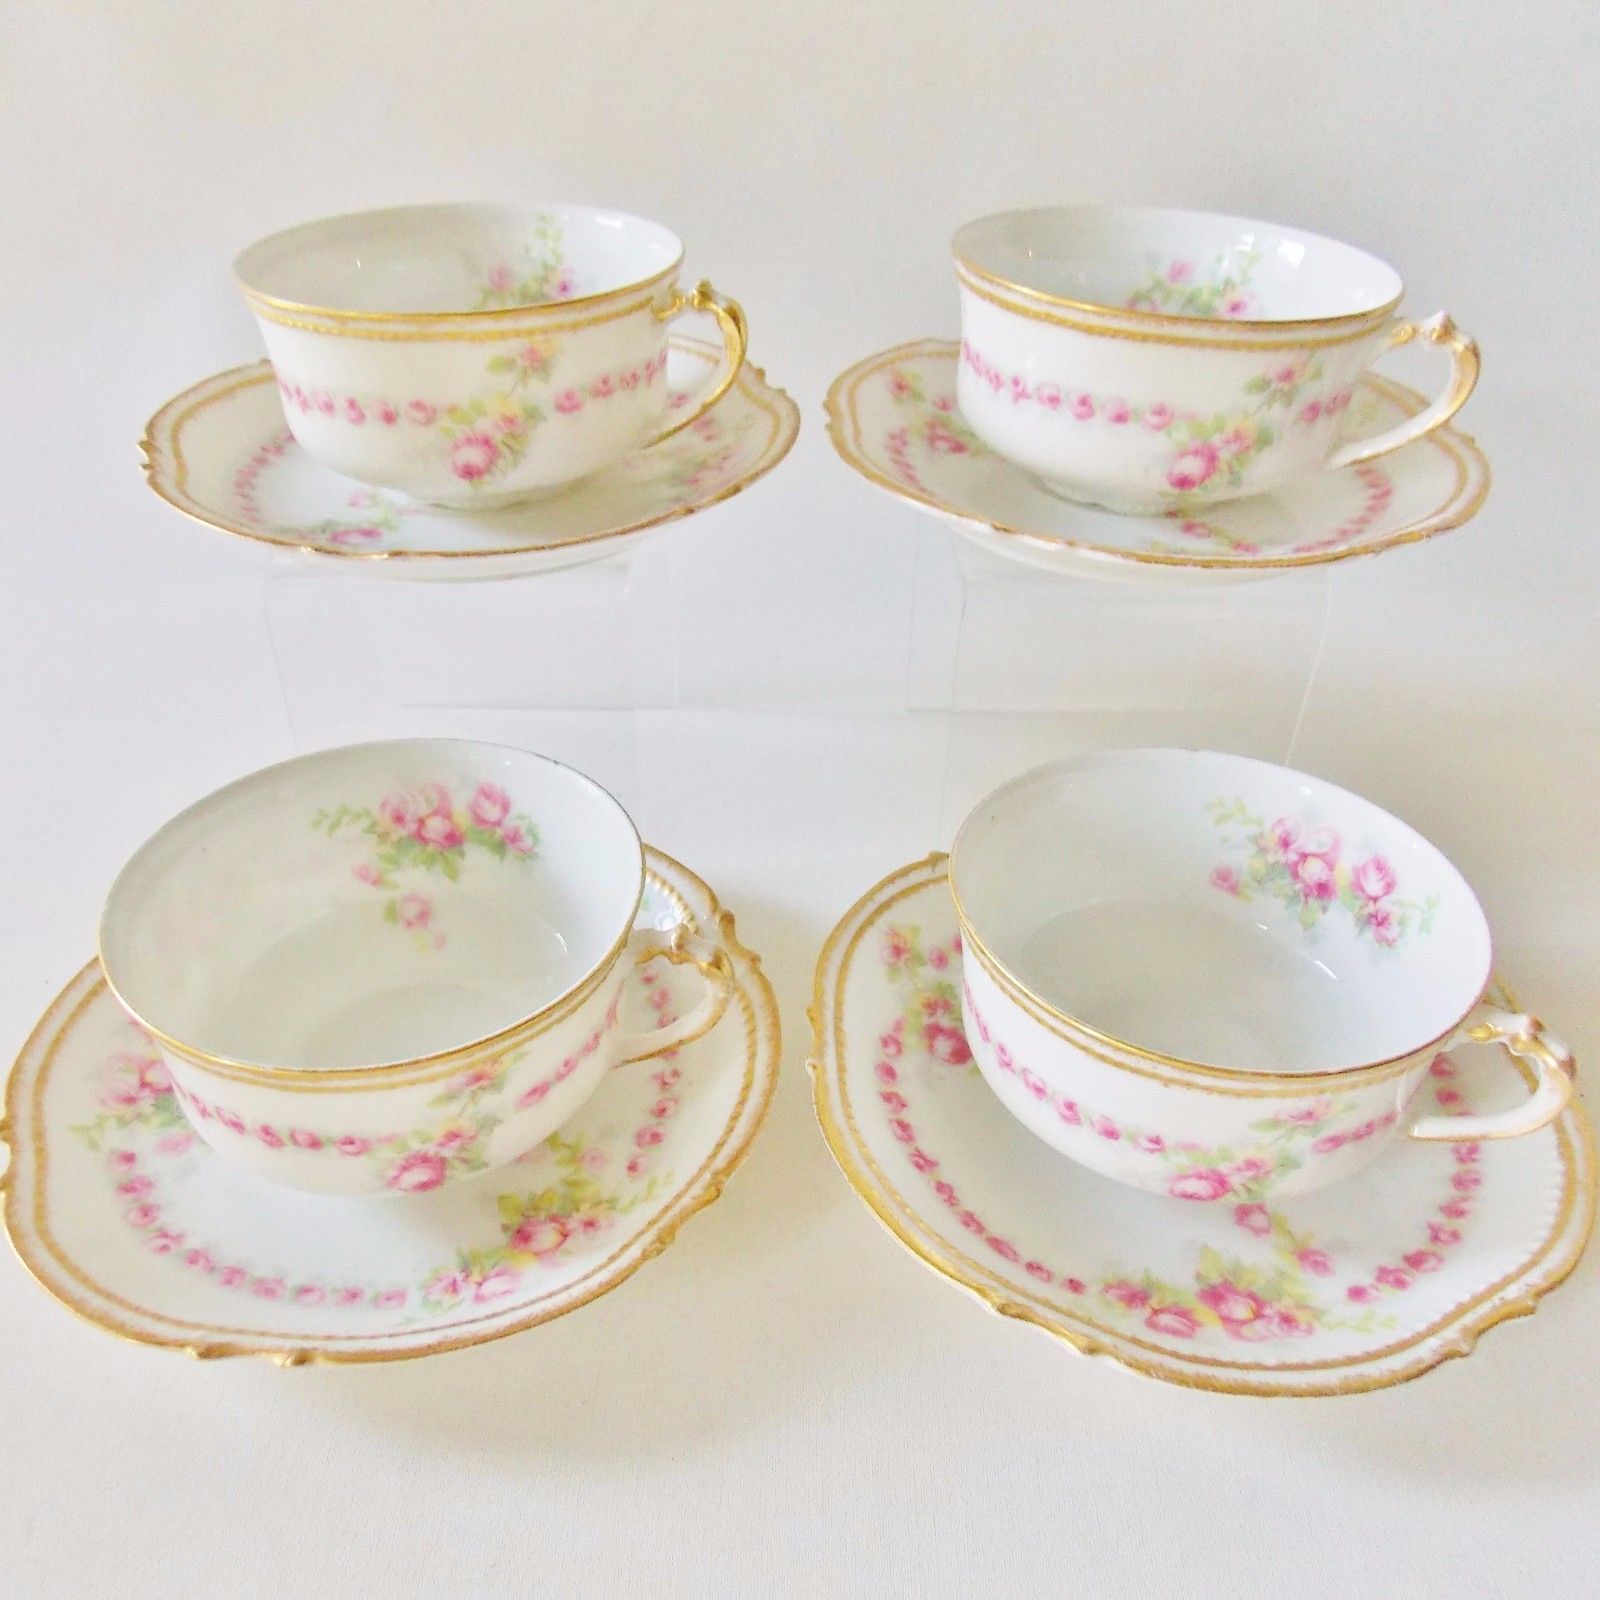 LIMOGES FRANCE SET OF FOUR DROP ROSE STYLE CUPS AND SAUCERS PINK ROSES PRETTY